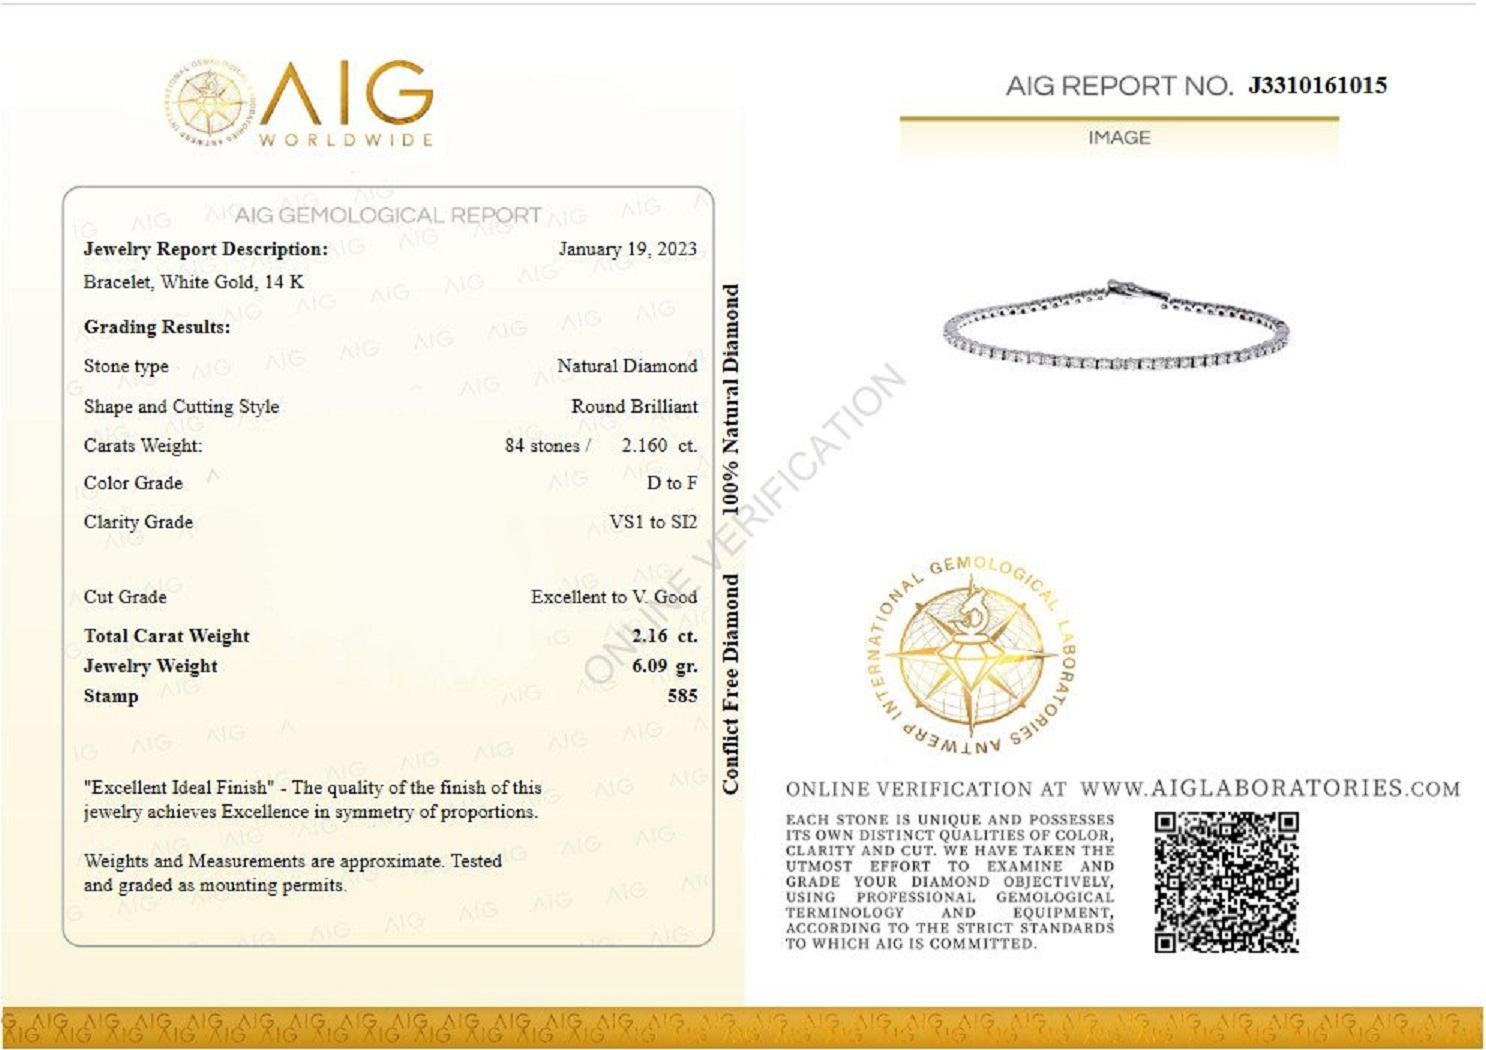 ** In Hong Kong and the USA the VAT is 0%.
___________
Natural Diamonds
Cut: Round Brilliant
Carat: 2.16 cttw / 84 stones
Color: D to F
Clarity: VS1 to SI2

Item ships from Israeli Diamonds Exchange, customers are responsible for any local customs